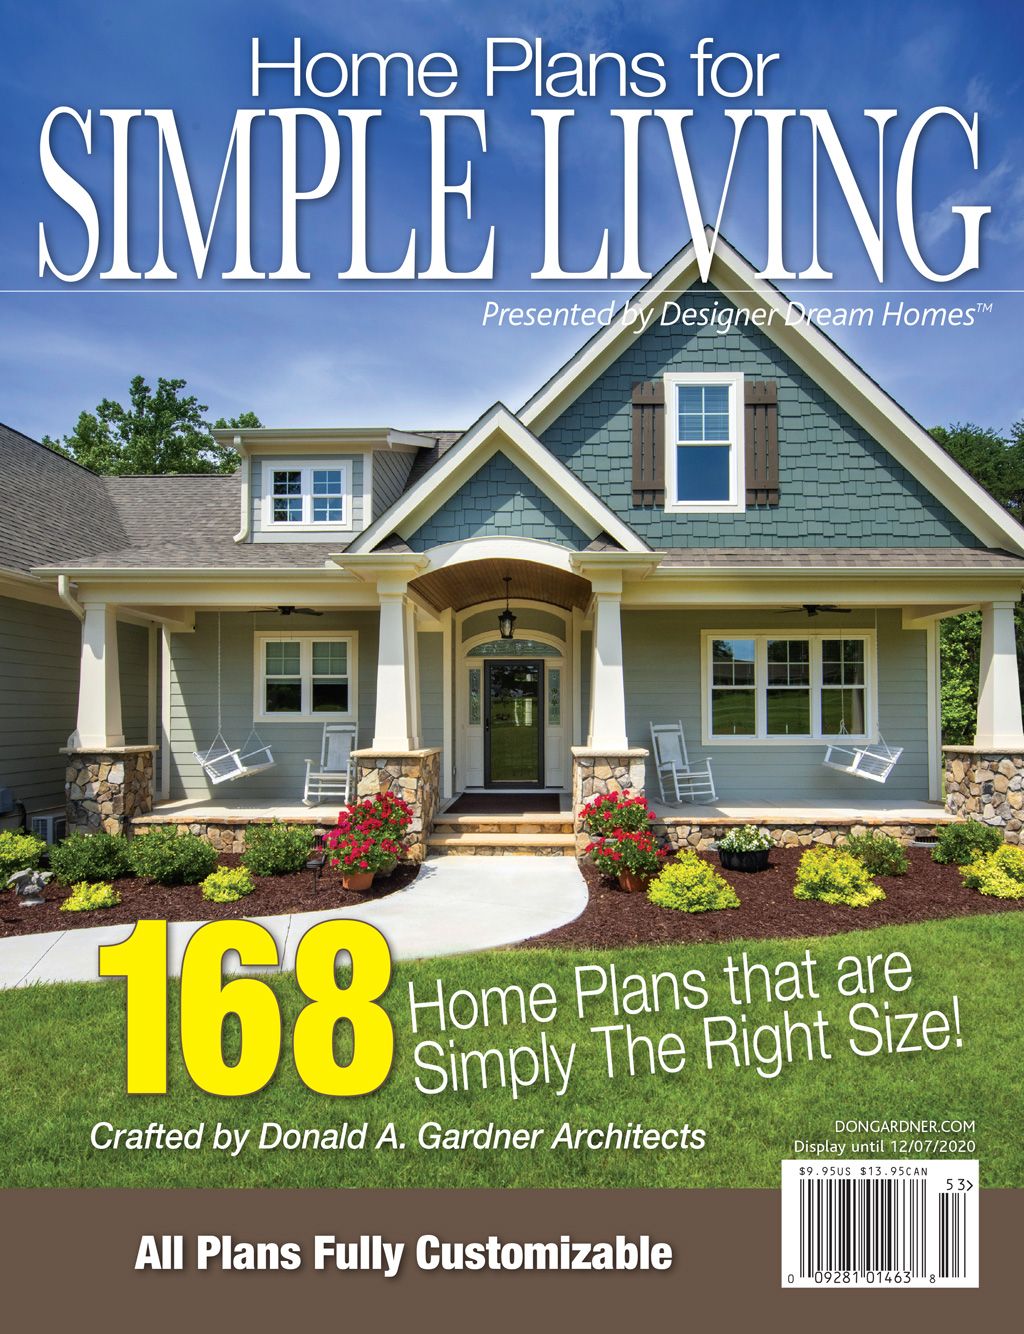 Home Plans for Simple Living